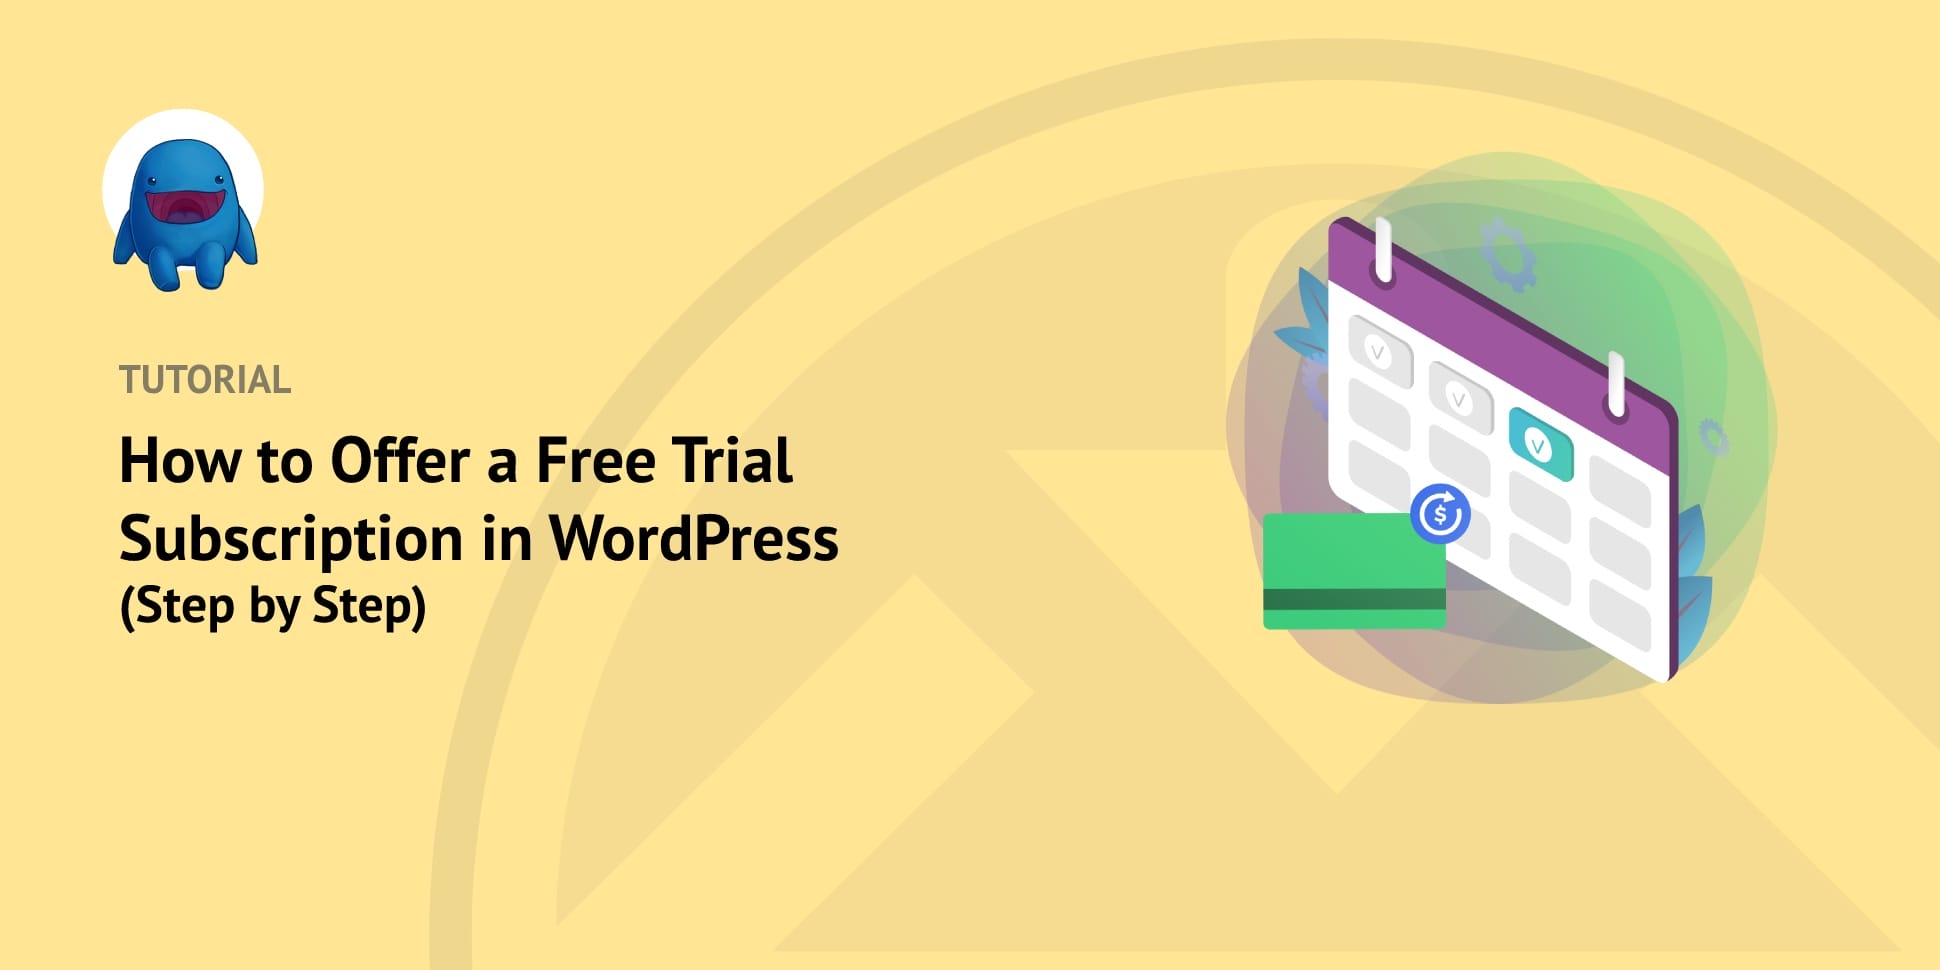 How to Offer a Free Trial Subscription in WordPress